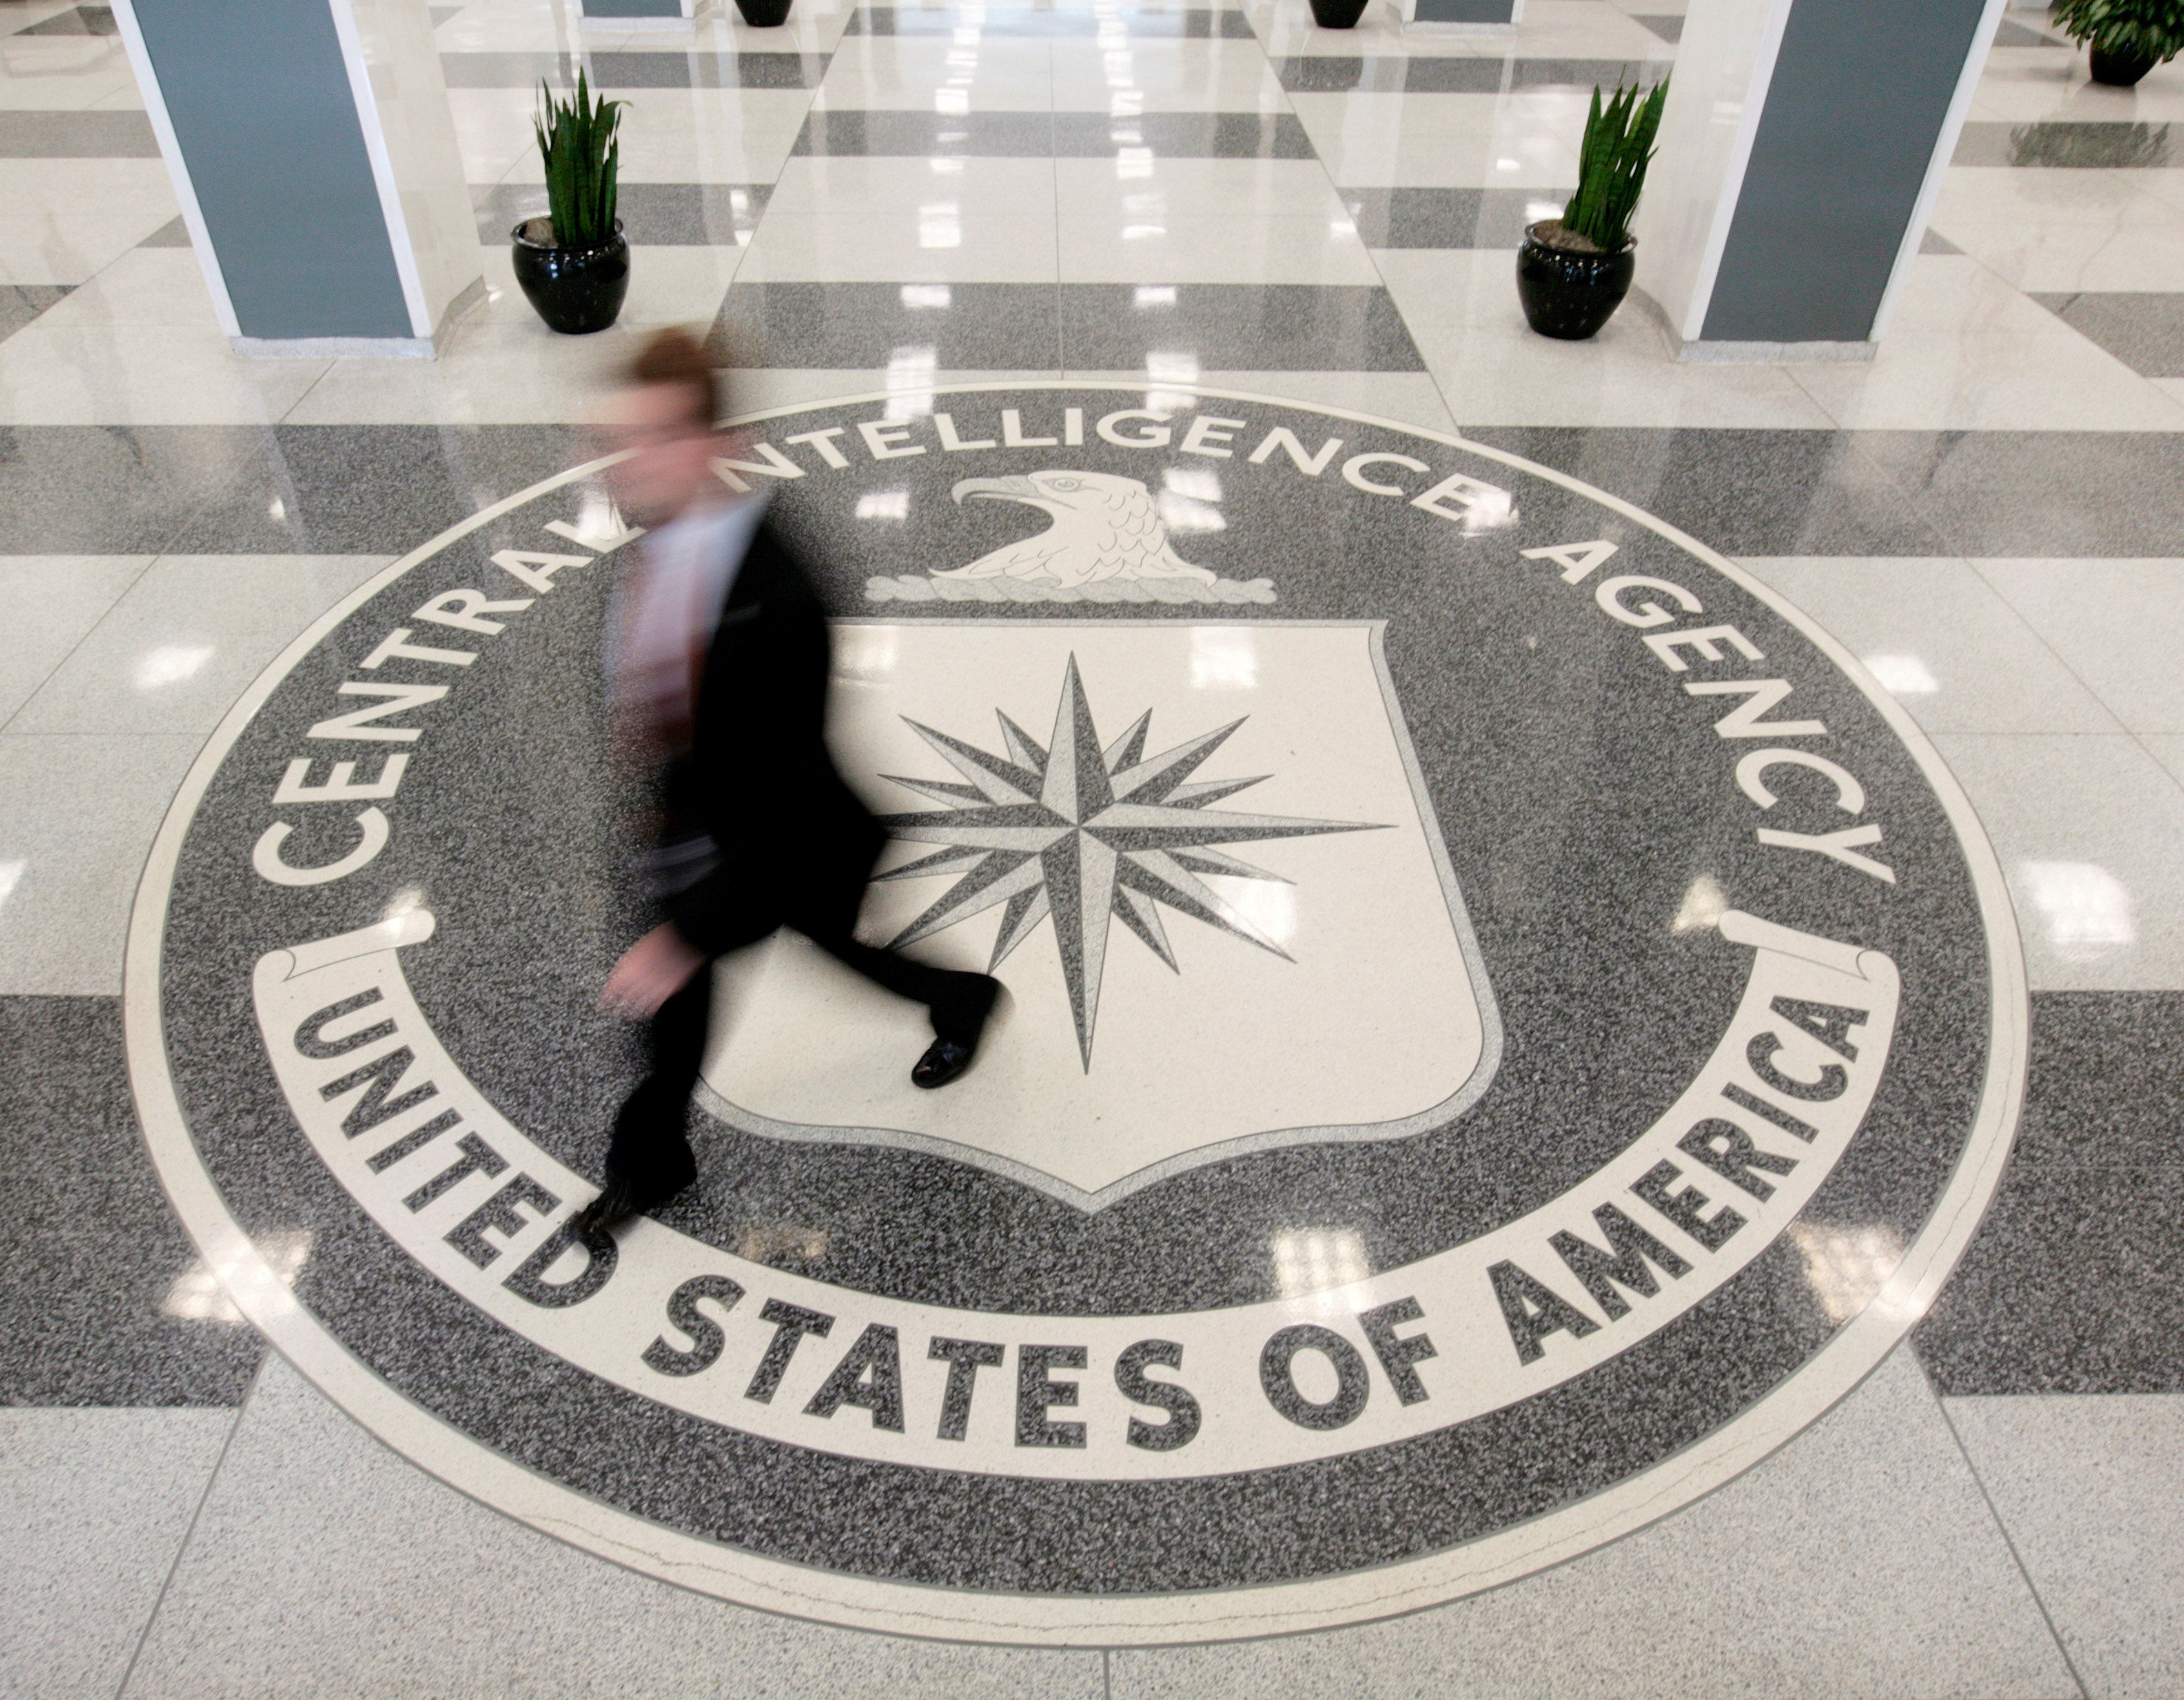 The lobby of the CIA Headquarters Building in Langley, Virginia, US. Photo: Reuters